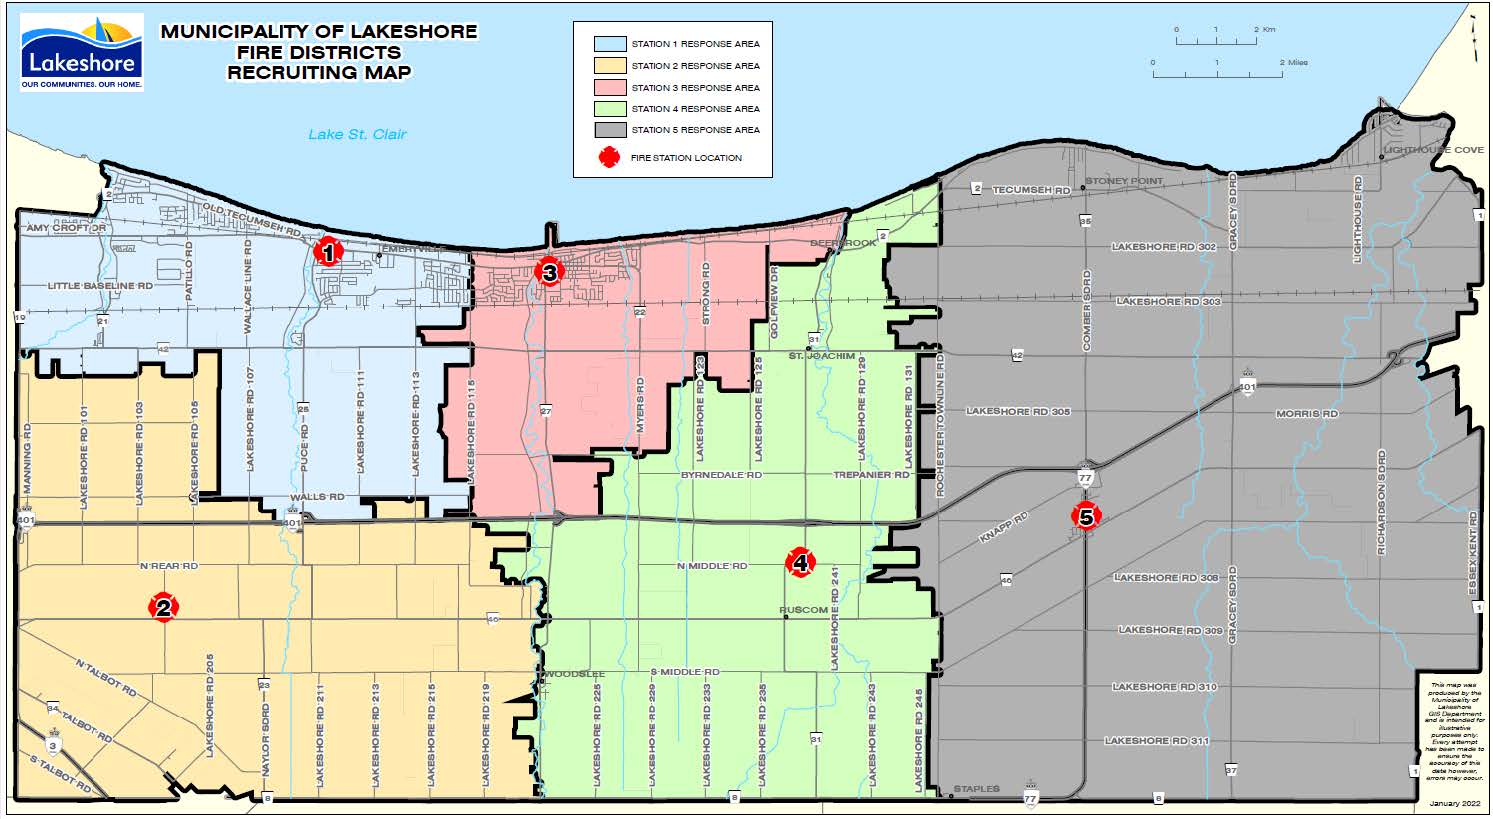 A map of the Municipality of Lakeshore broken down into five segments. Each fire station is highlight on the map showing their response areas.